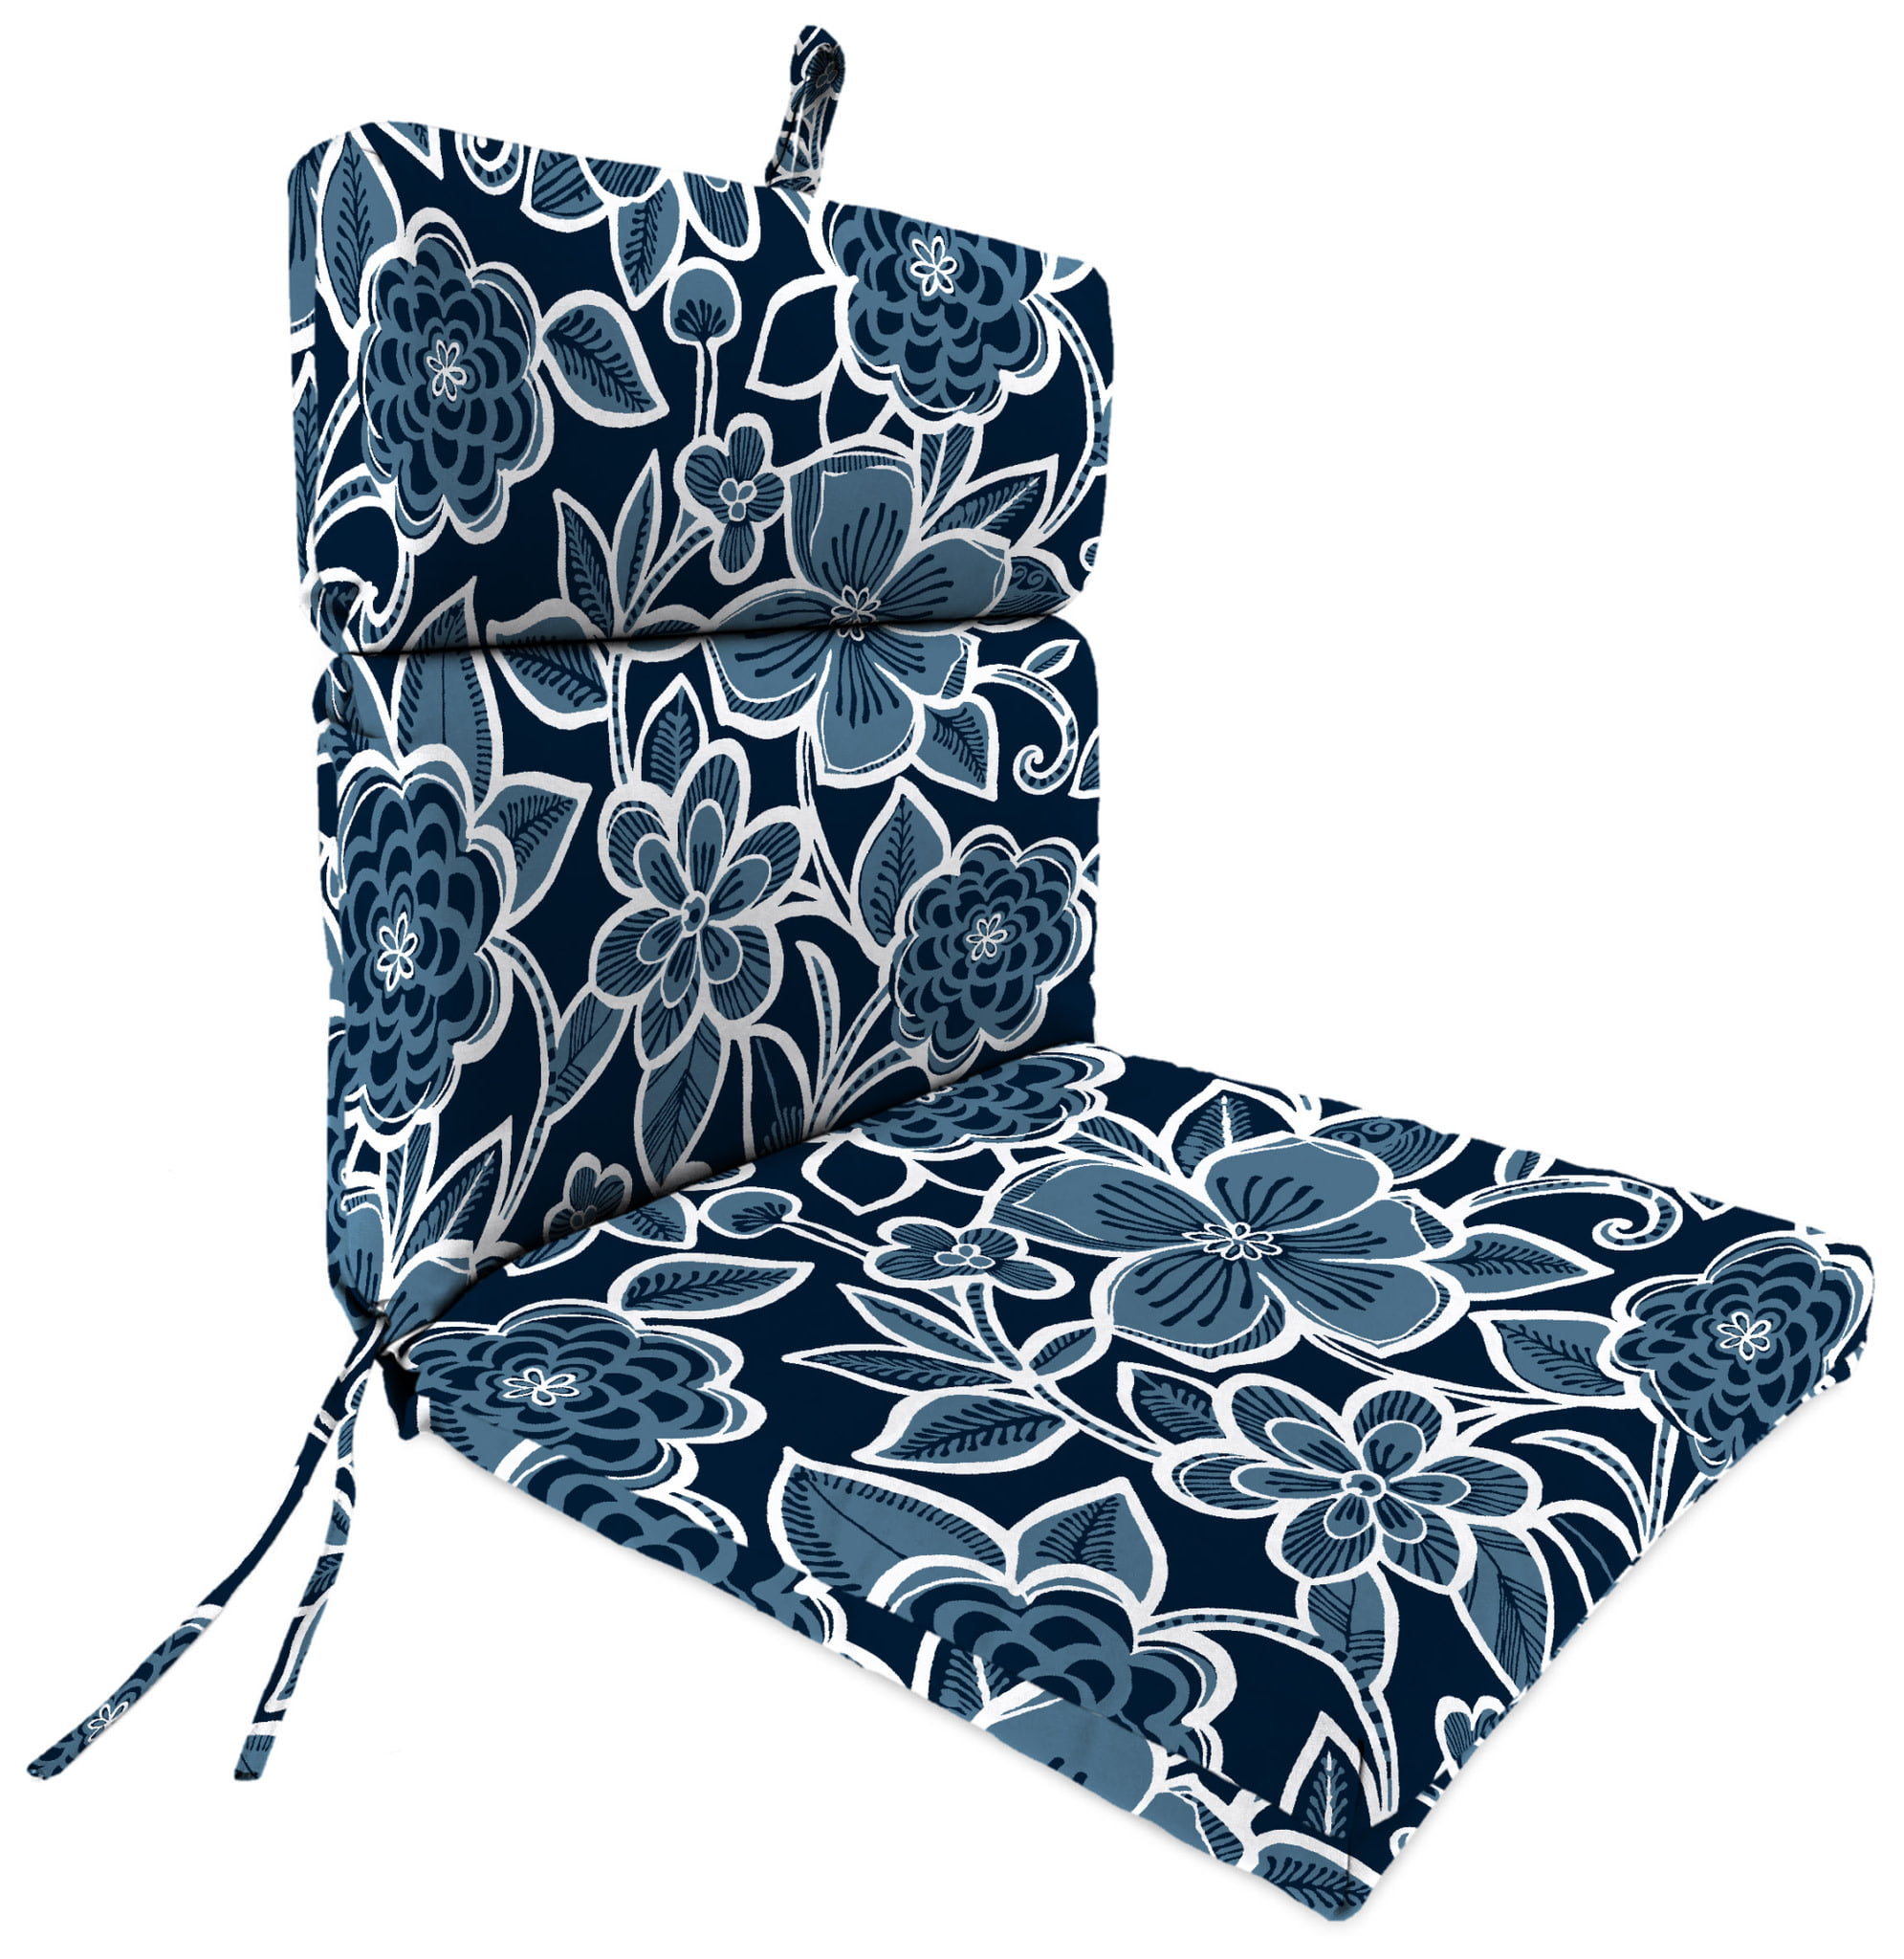 22 x 22 outdoor seat cushions